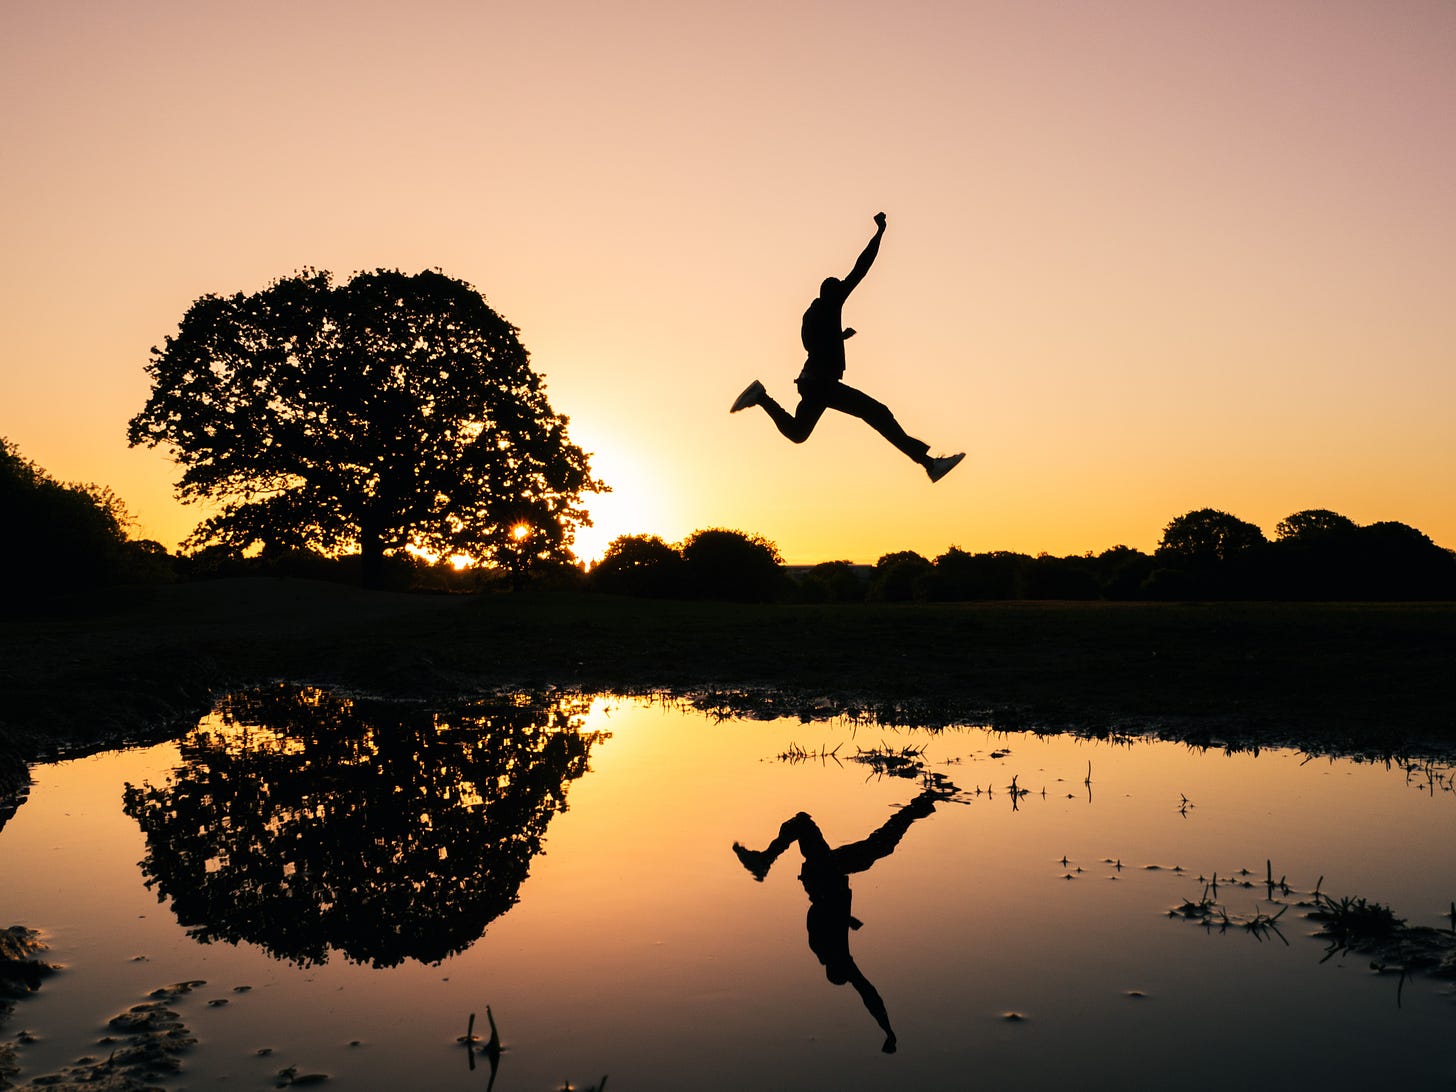 The silhouette of a person jumping over a pond. The sun rises in the background. The sky is a peach color, with the water reflecting the same color.